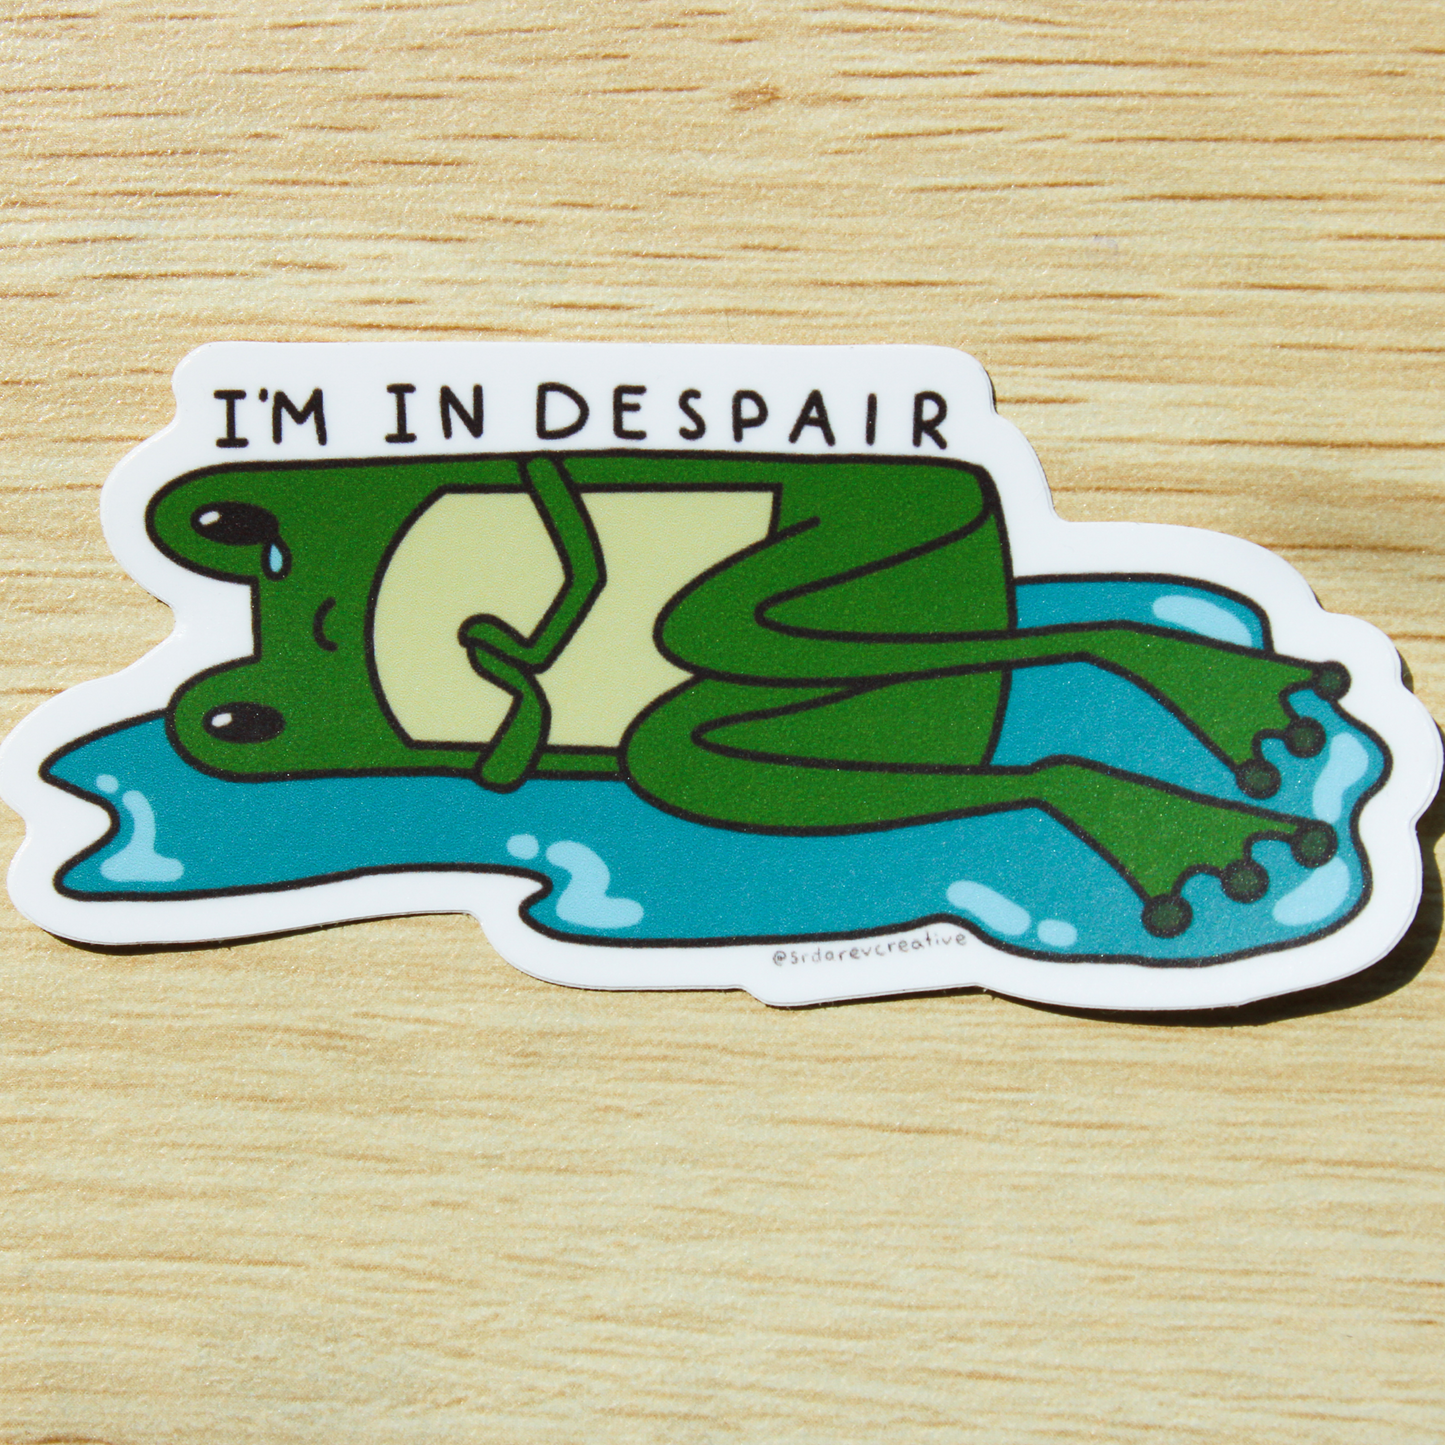 Hand holding a sticker of a cartoon frog lying down in a puddle with a tear falling down one eye and holding its hands. On top is written "I'M IN DESPAIR". Background is a wooden table.